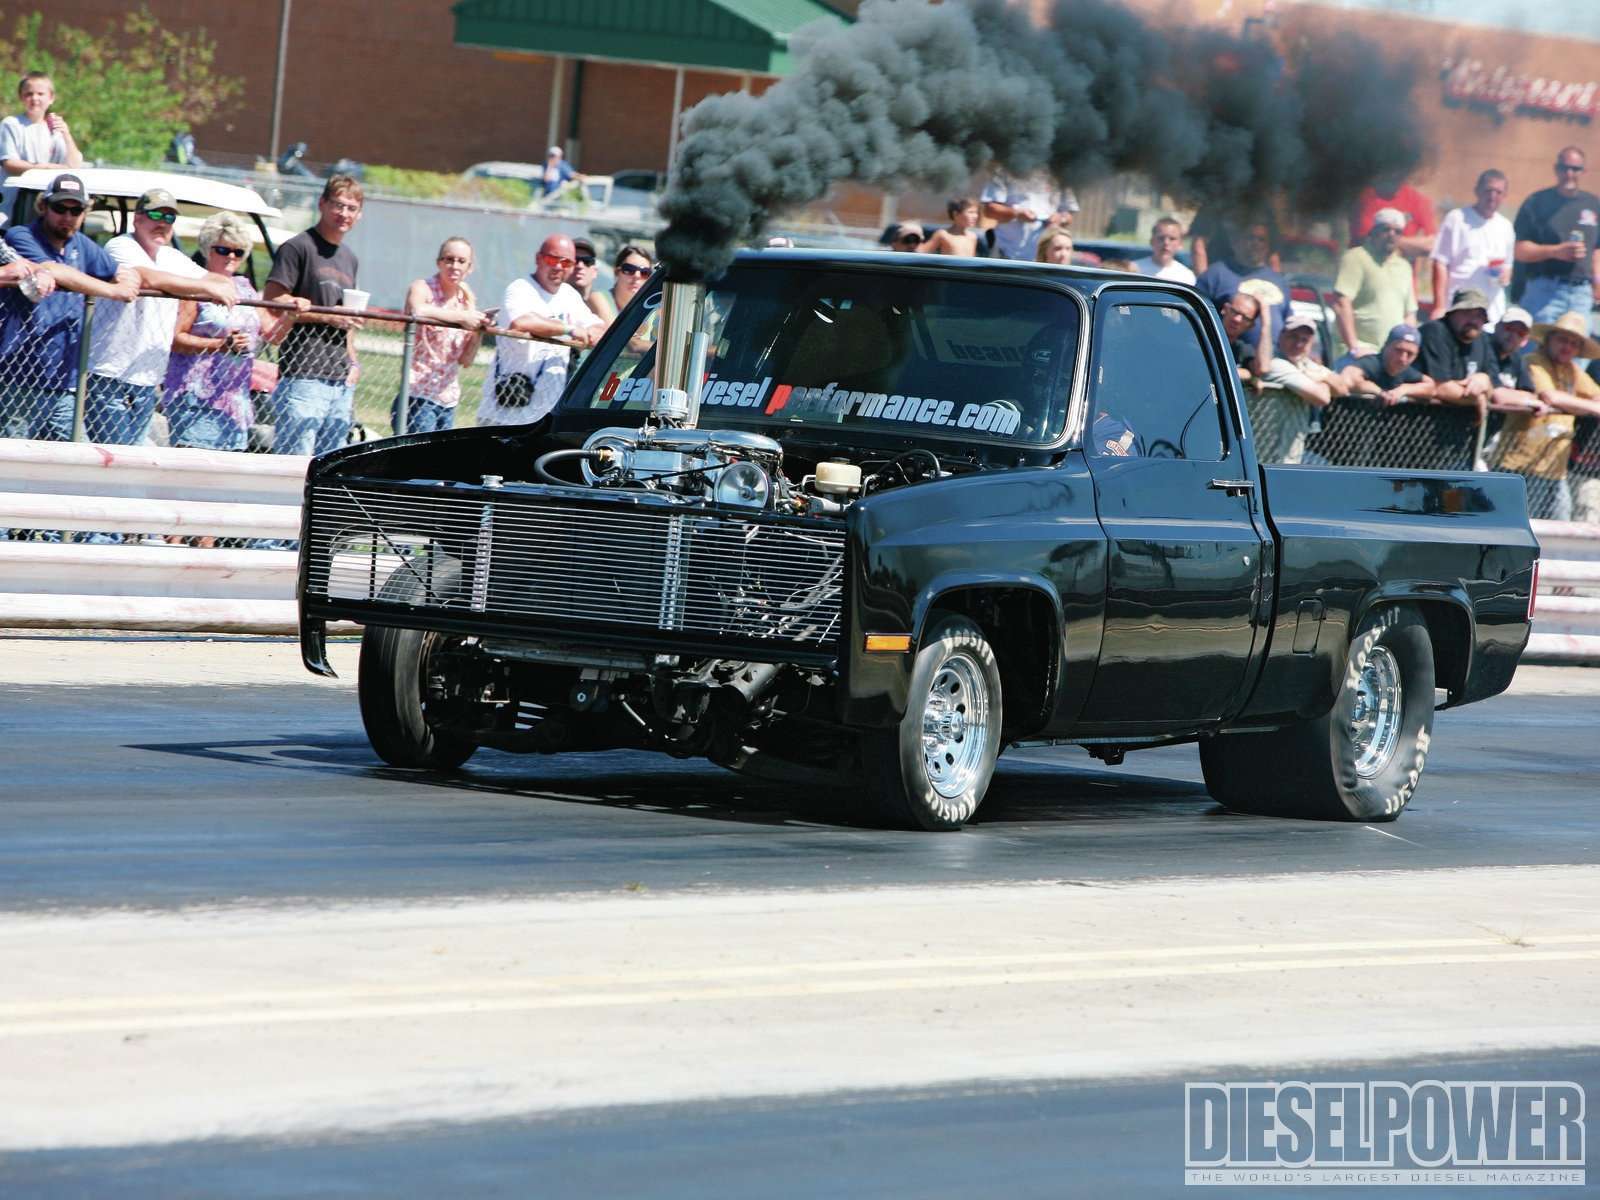 A Wheels Up Chevy Packing Ford Parts And Cummins Power - Dodge Ram - HD Wallpaper 